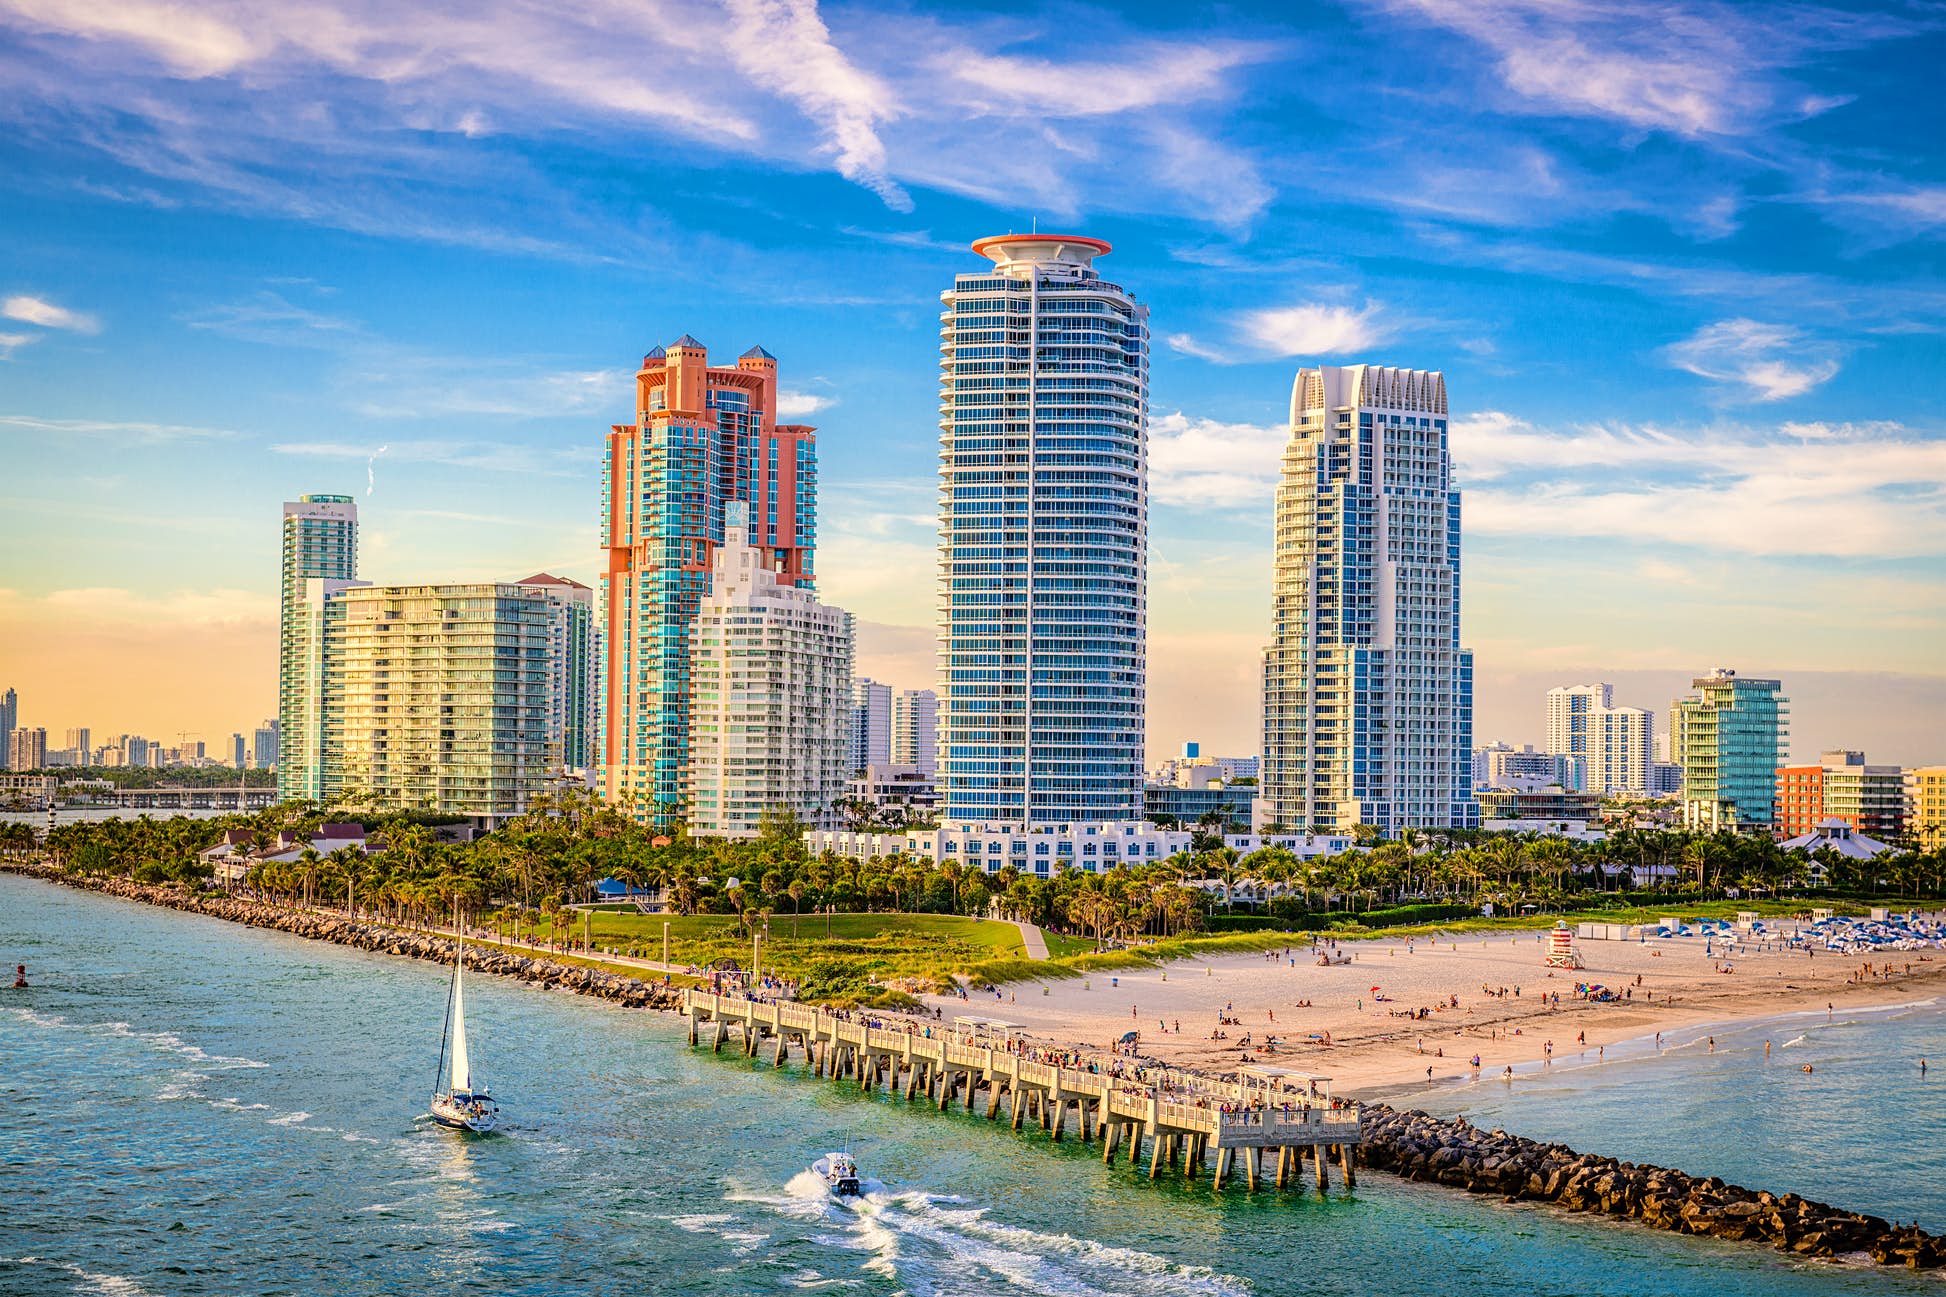 Arrivals from the tri-state area are required to self-isolate upon arriving in Florida ©Sean Pavone/Shutterstock